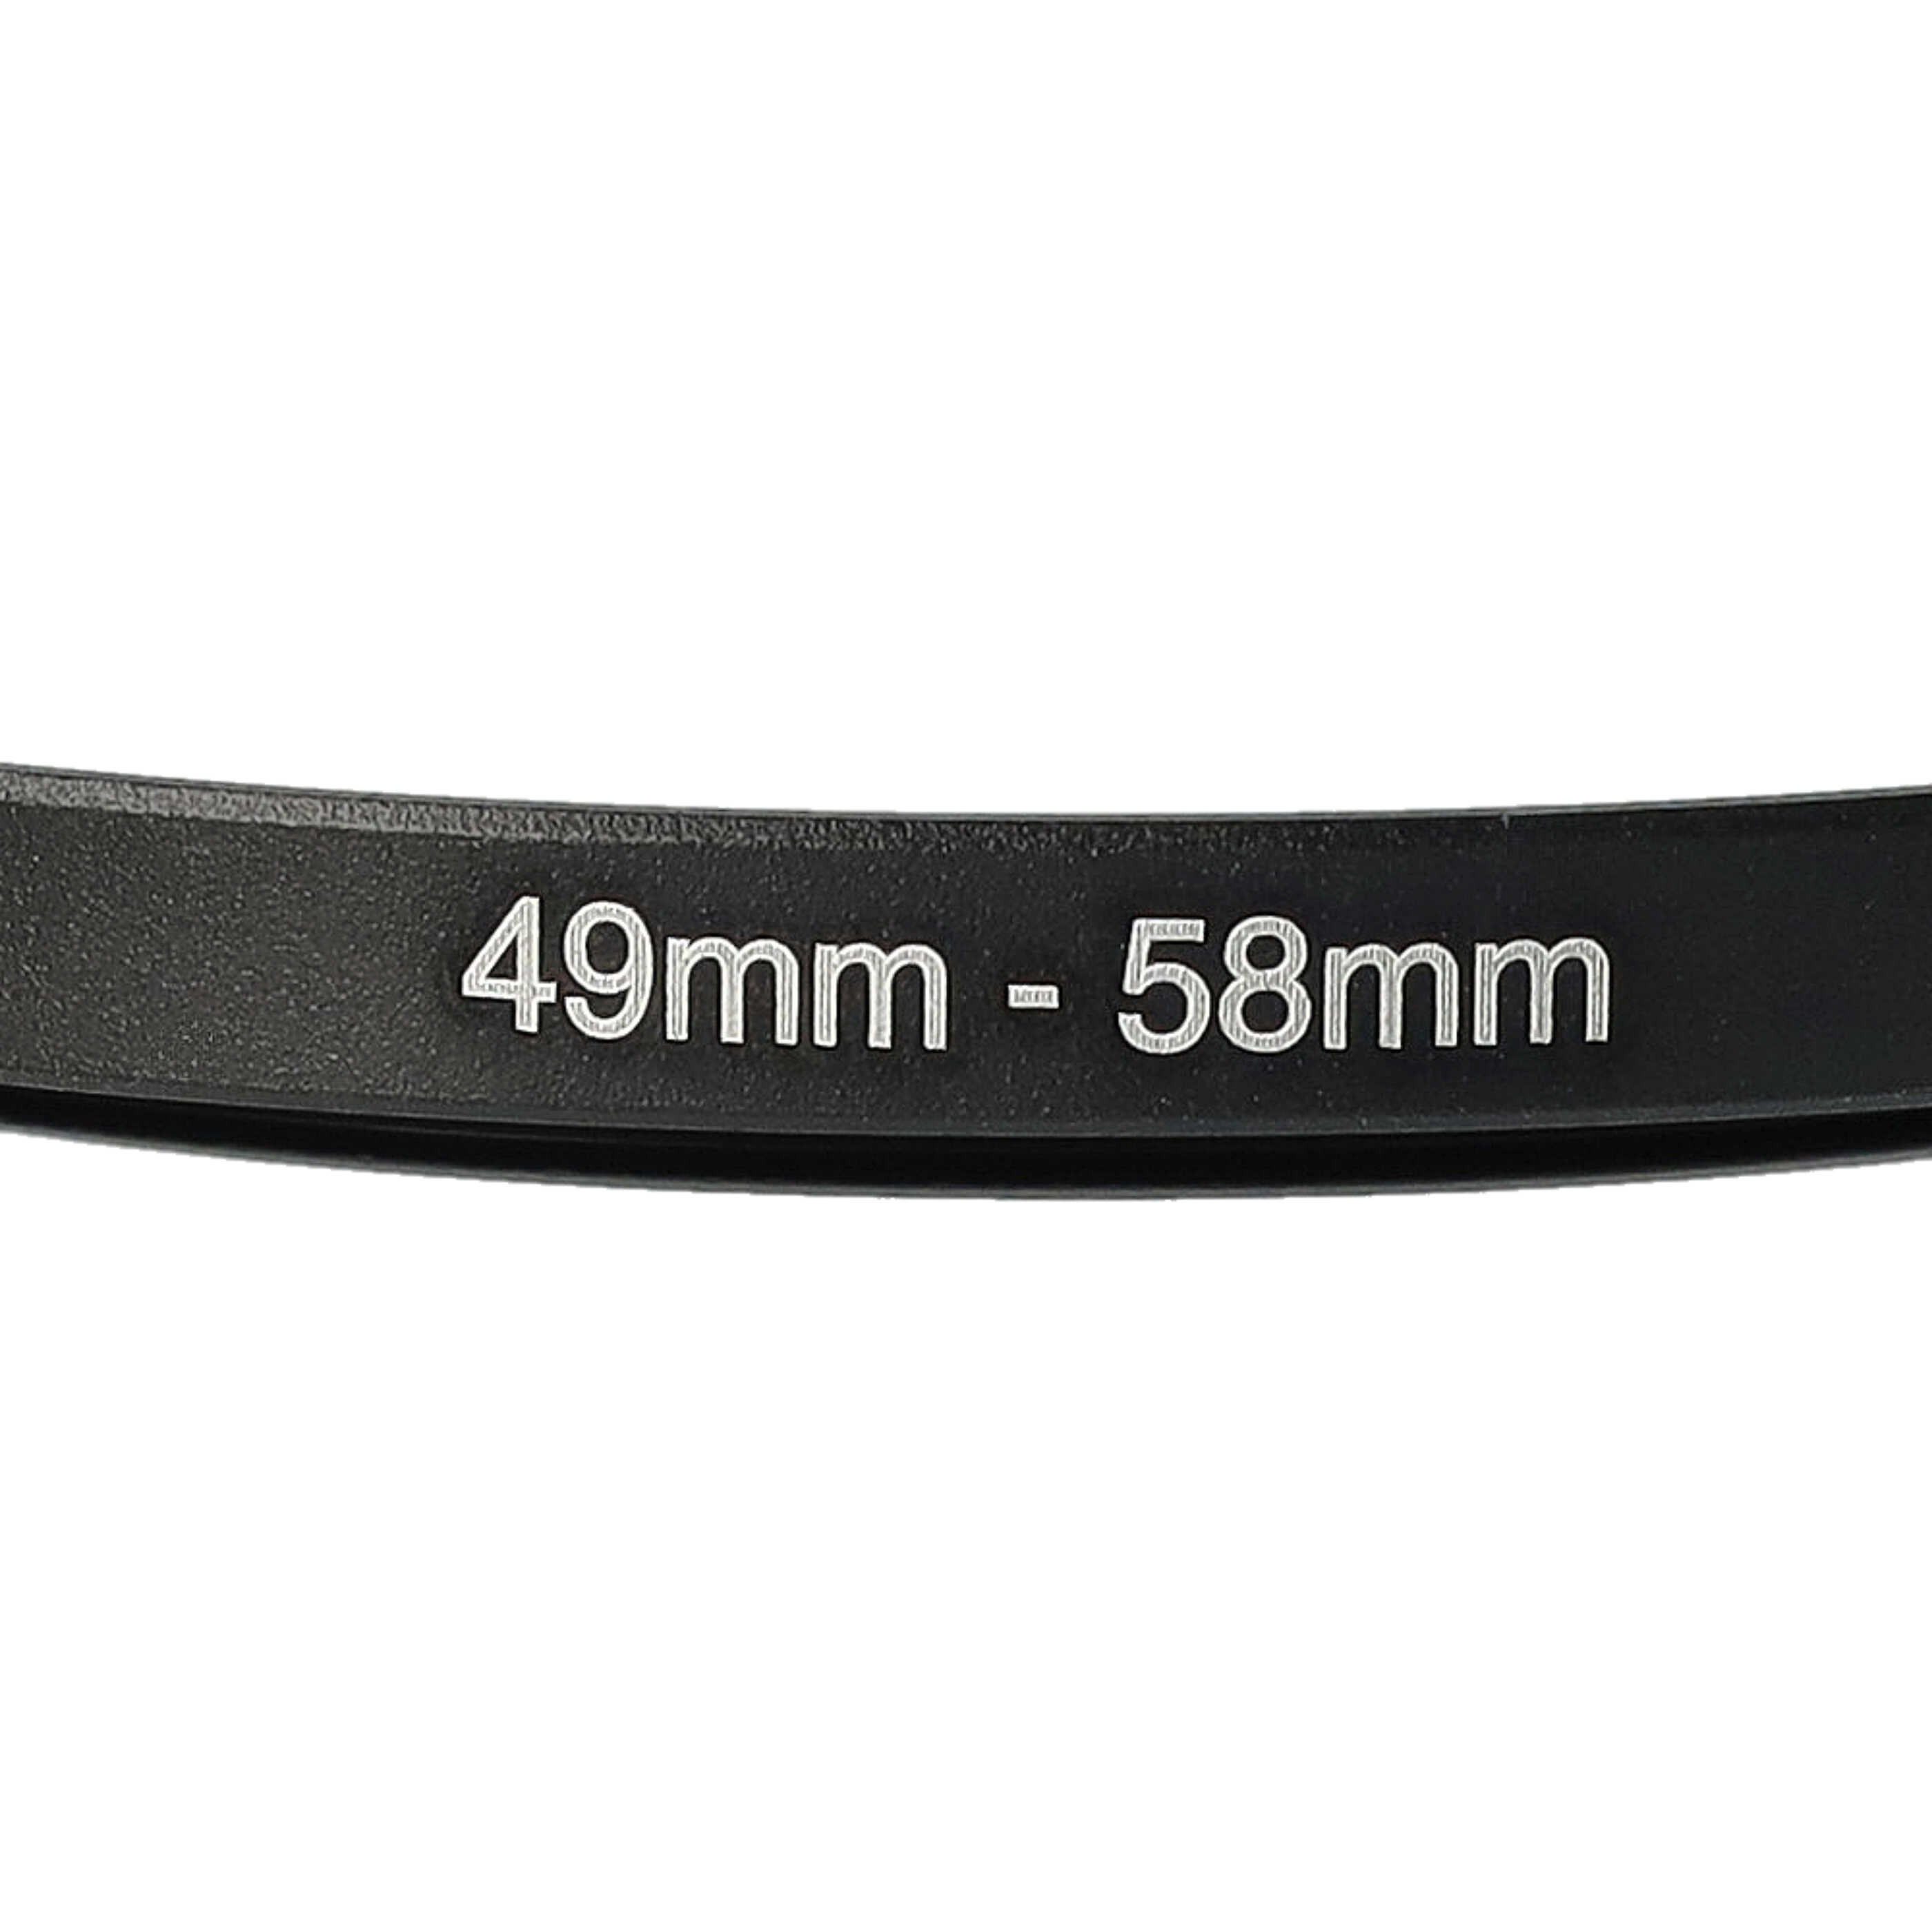 Step-Up Ring Adapter of 49 mm to 58 mmfor various Camera Lens - Filter Adapter